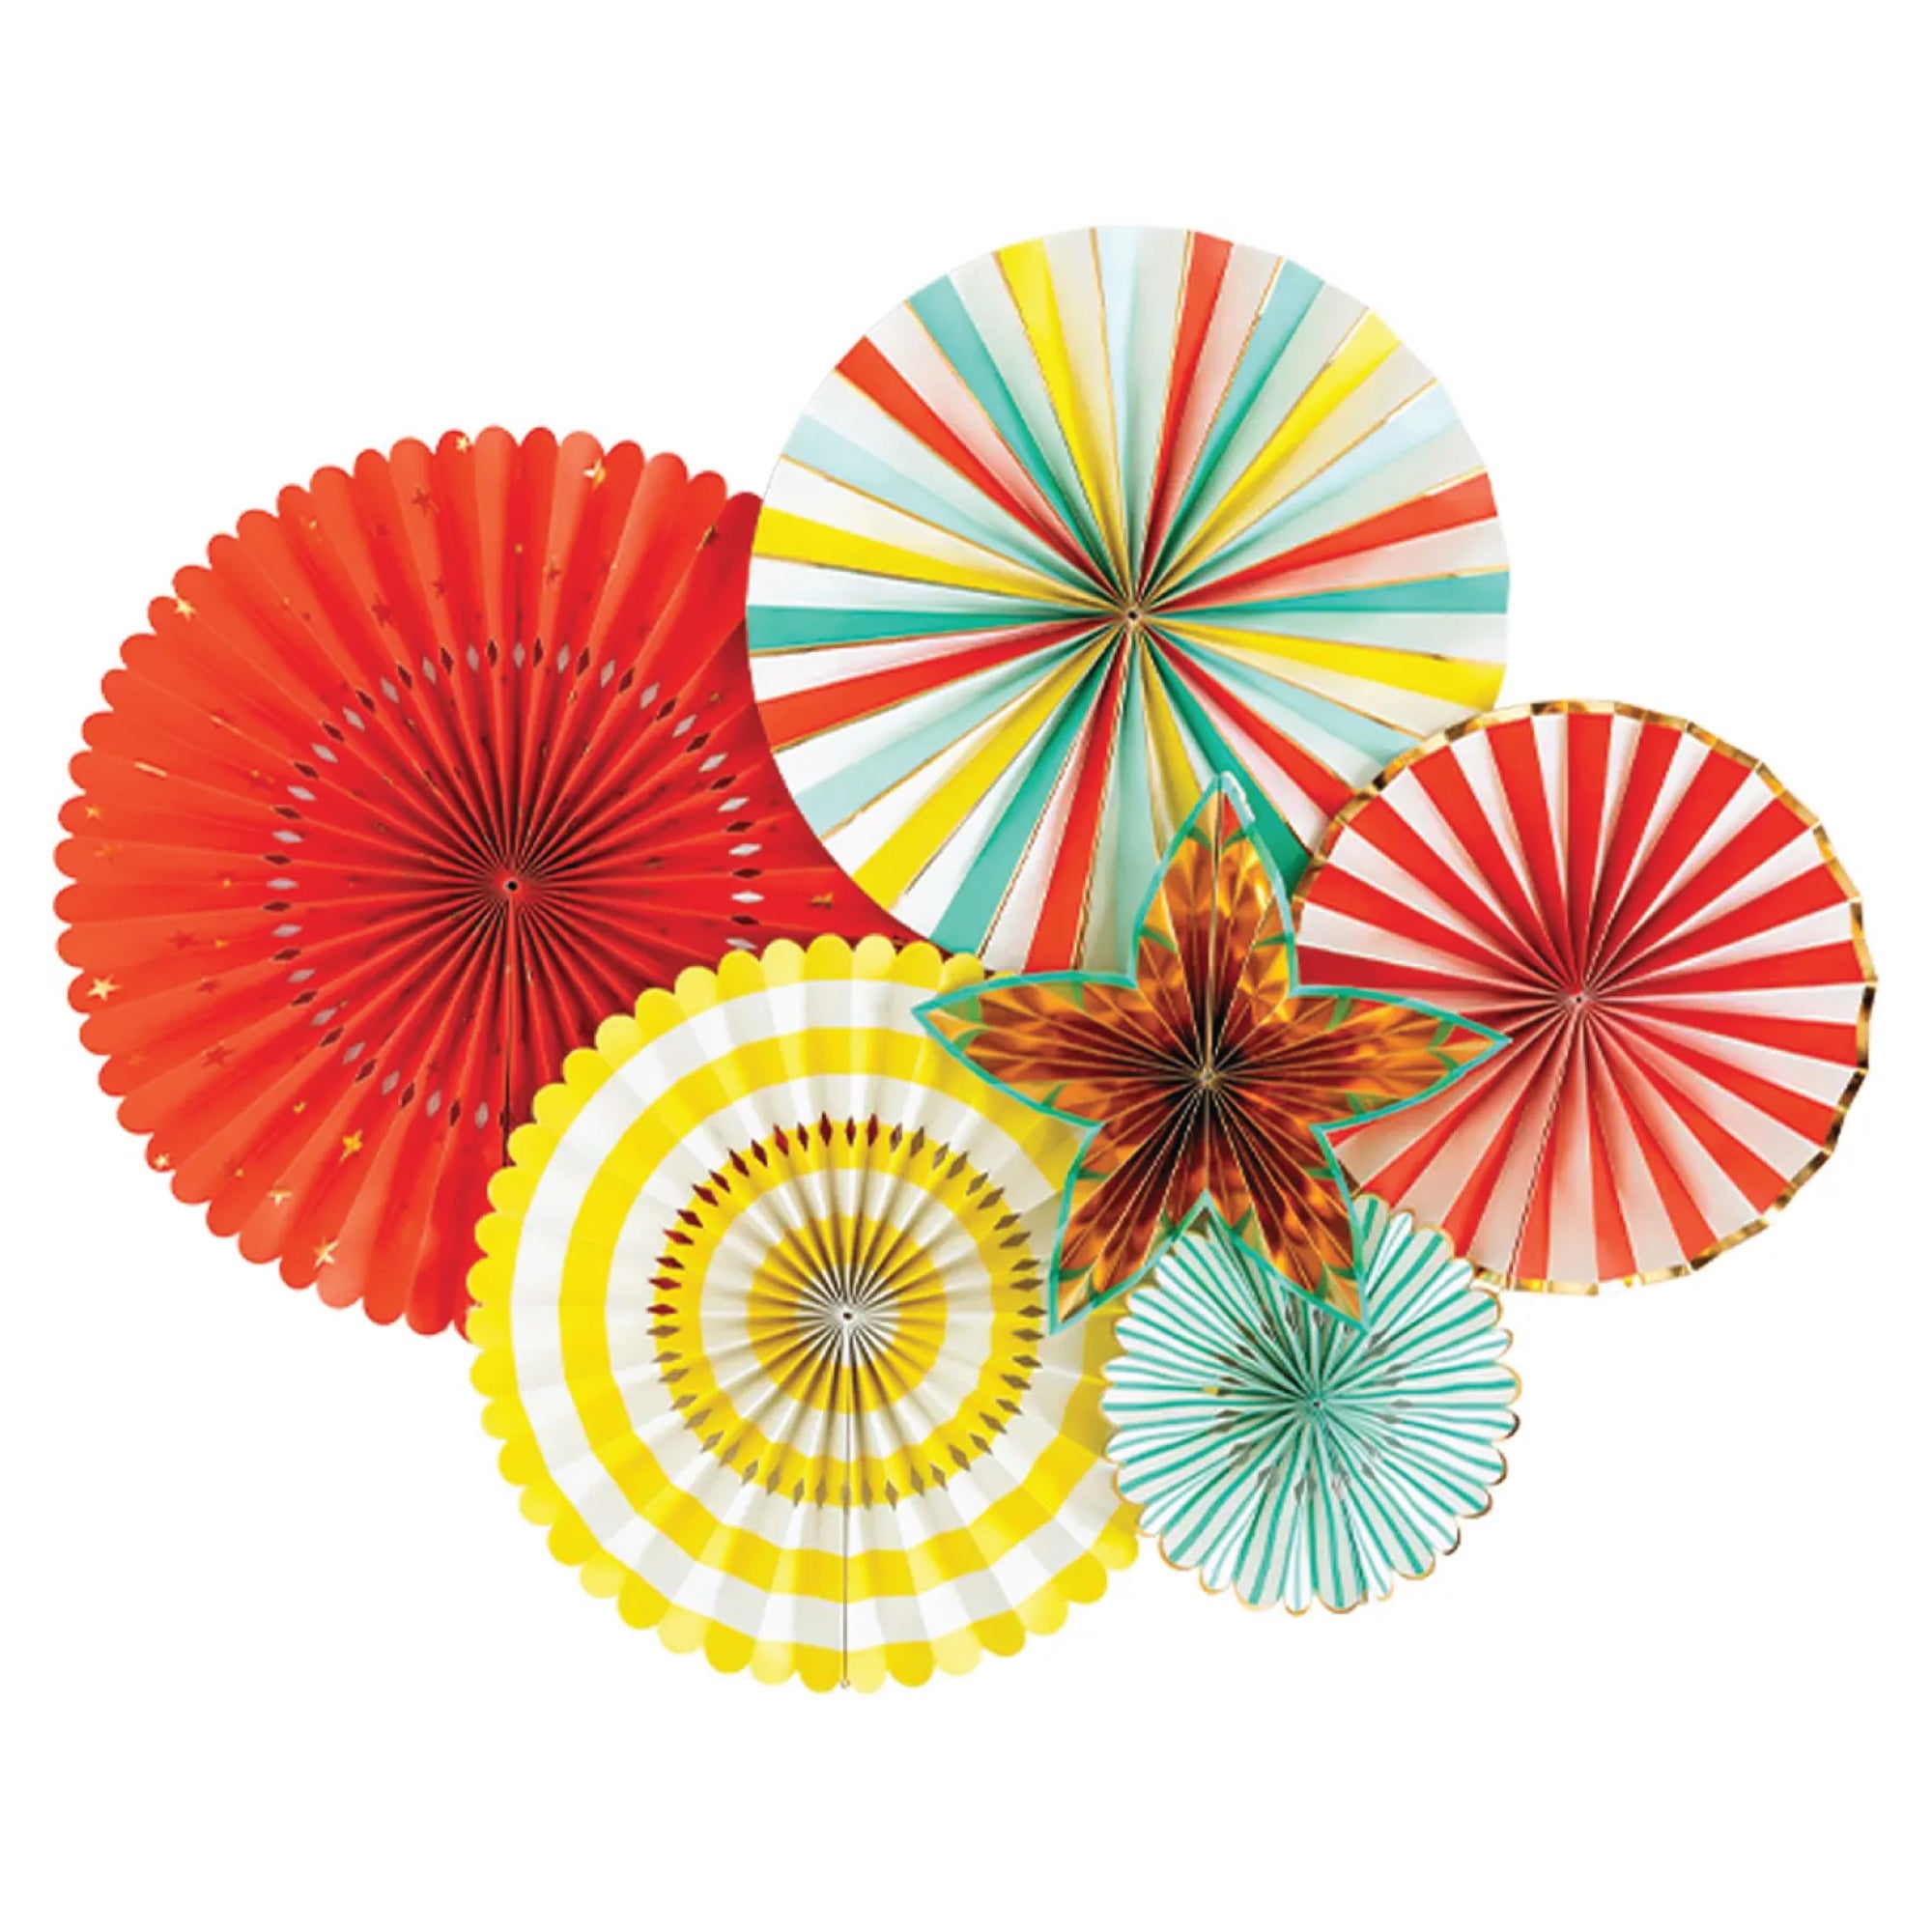 Devra Red Tissue Paper Fan 13in | The Party Darling